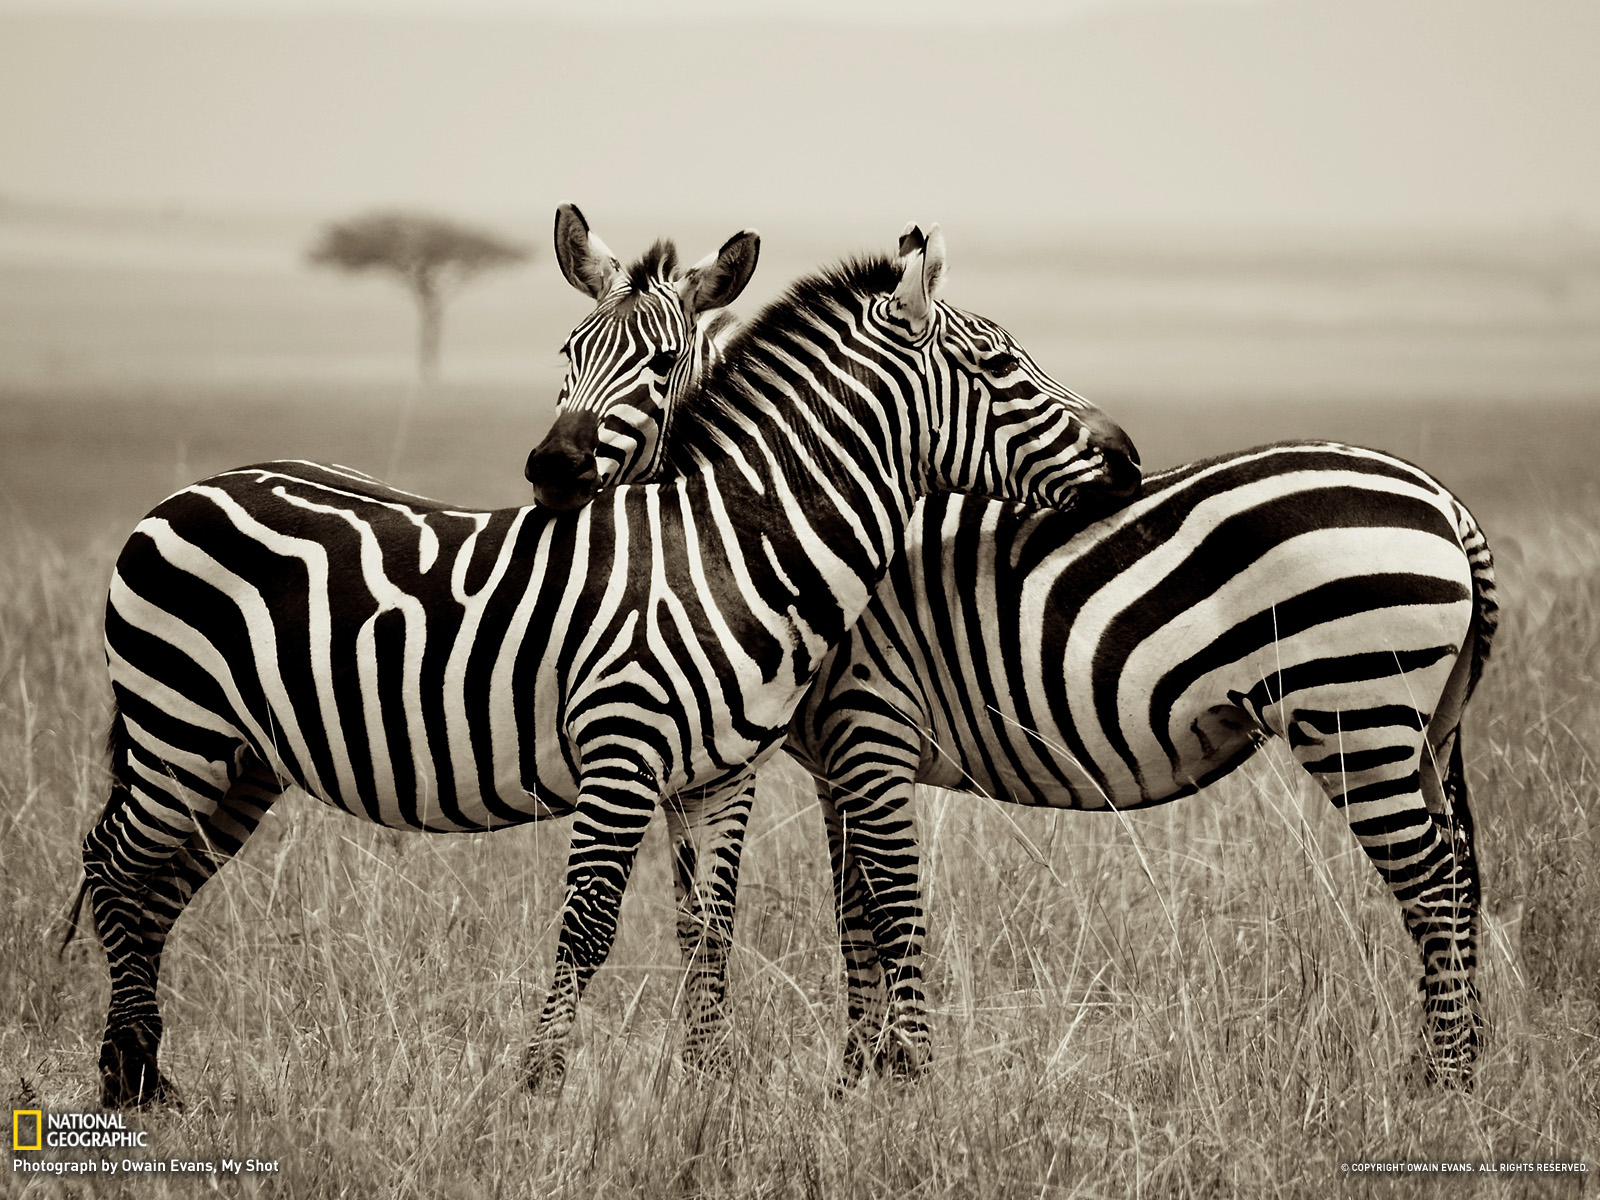 Zebra Picture Animal Wallpaper National Geographic Photo Of The